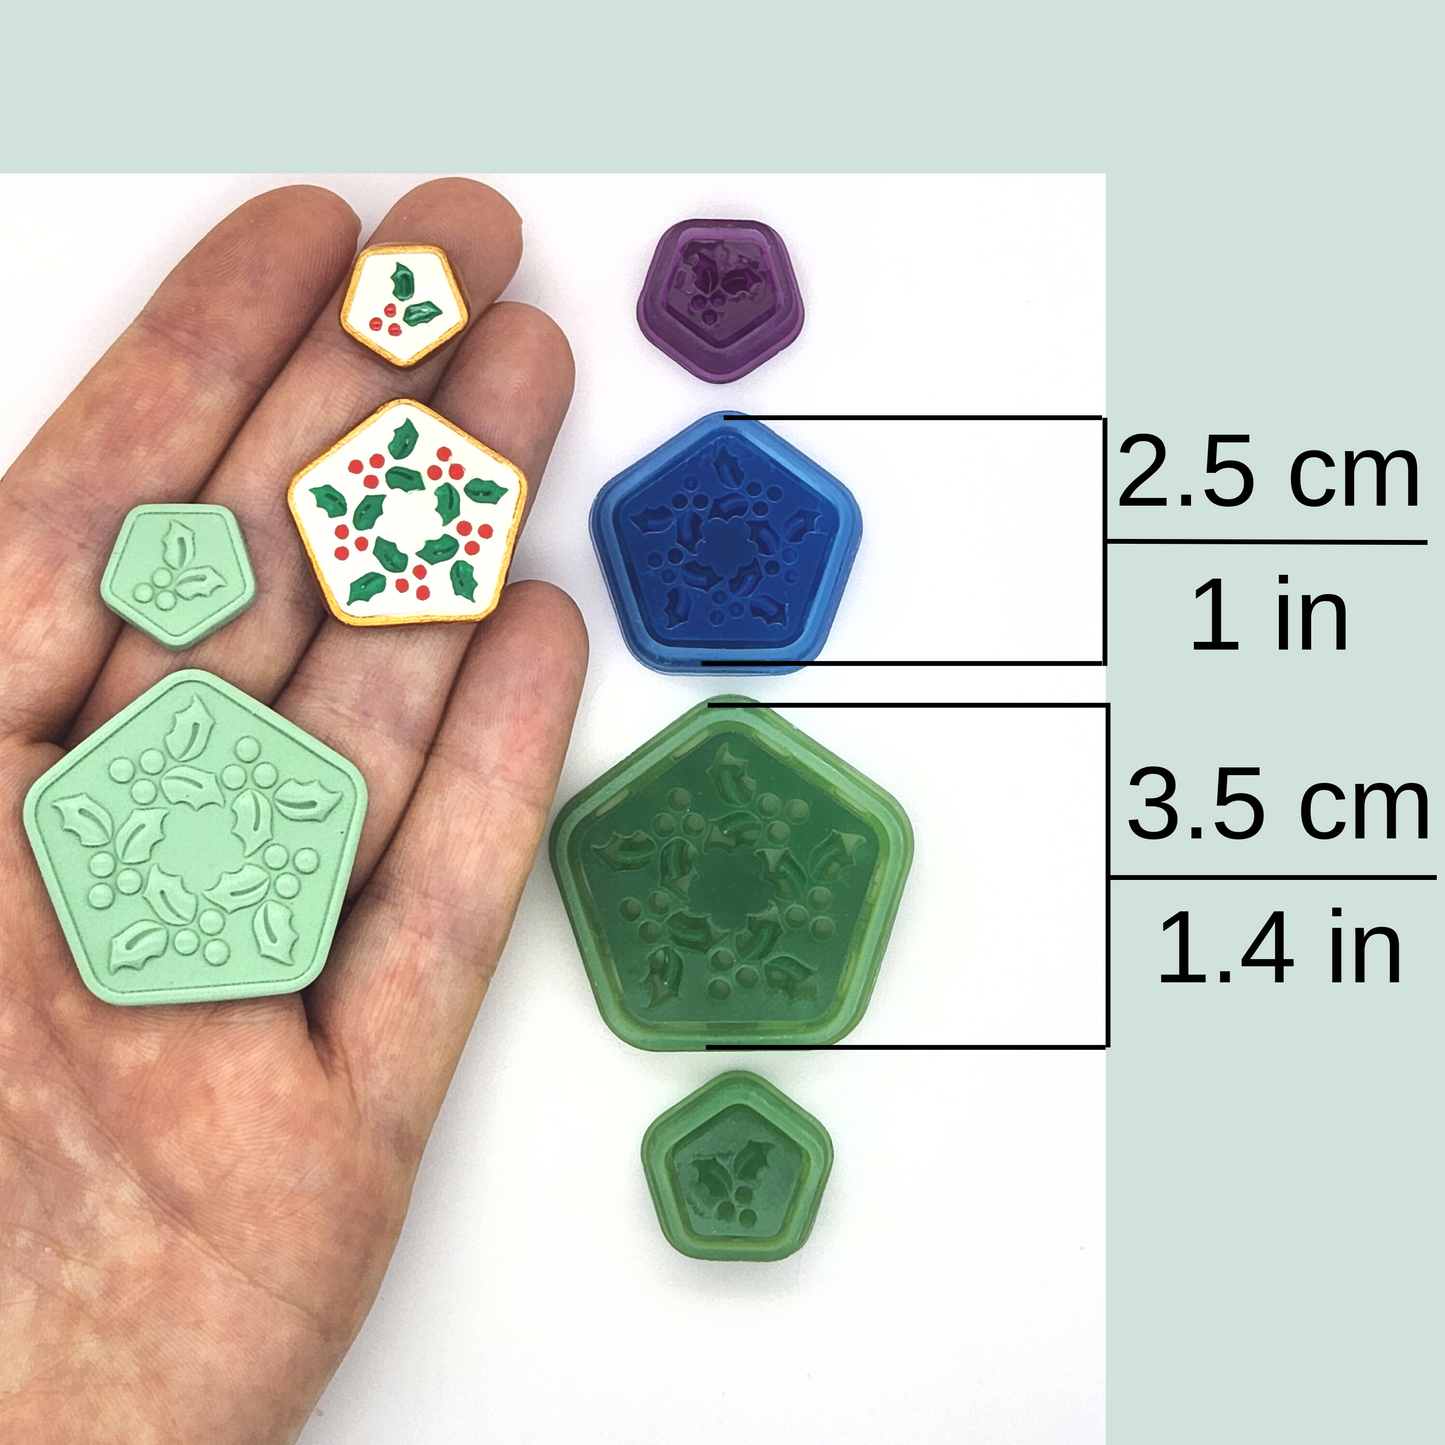 Winter Christmas Holly Tile Design Polymer Clay Cutter Set Sizes Tools and Supplies Earring and Jewelry Making